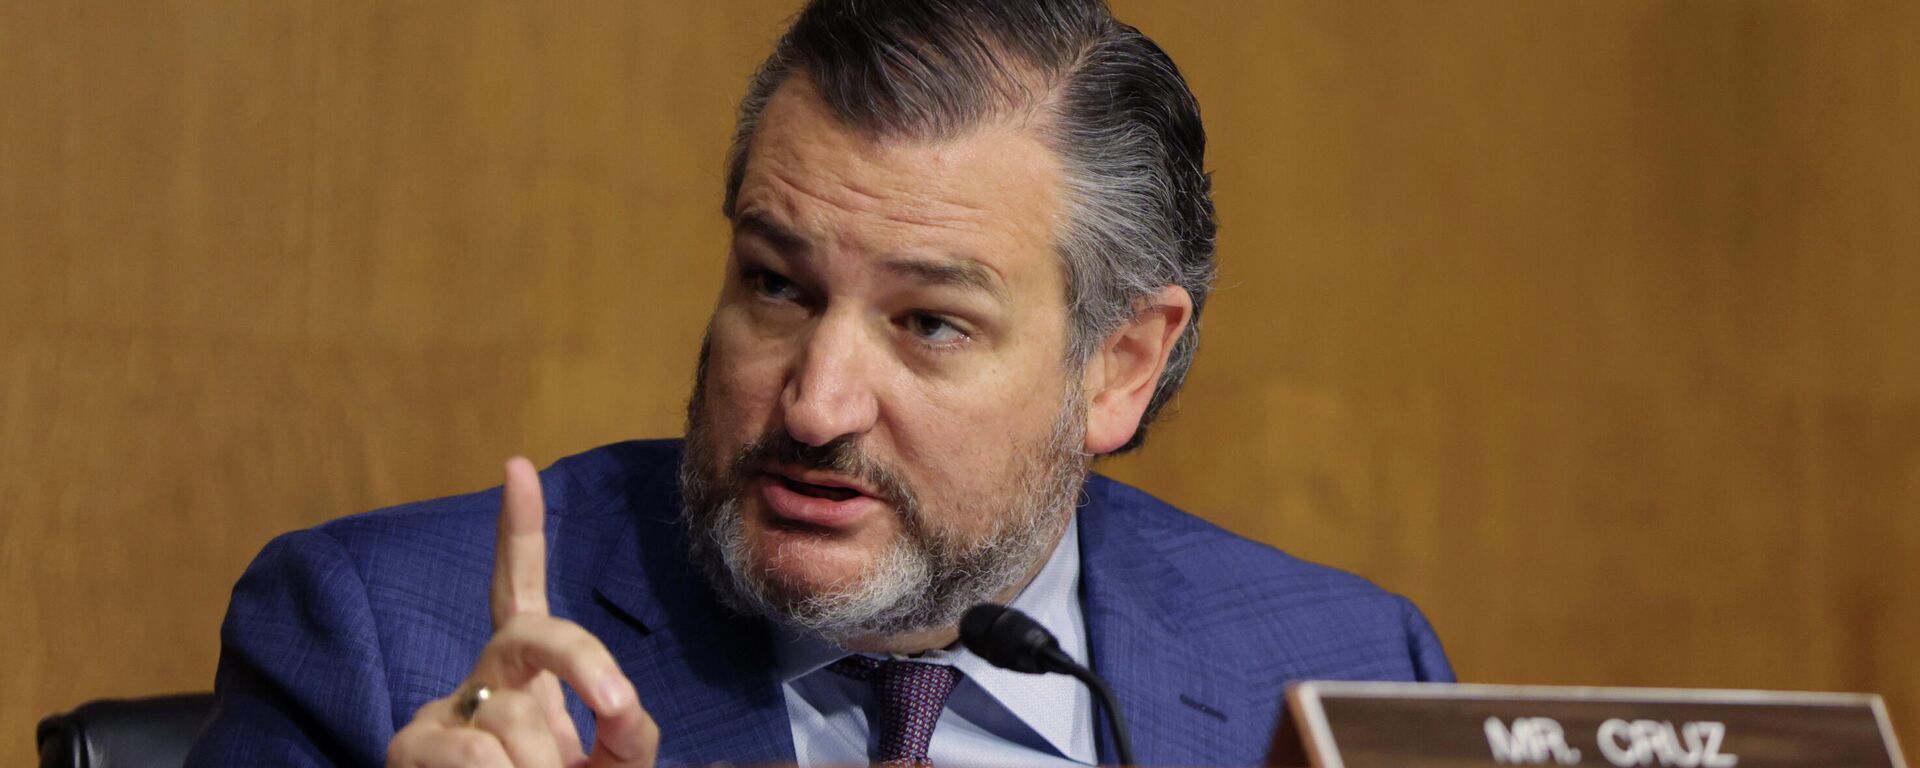 Sen. Ted Cruz, R-TX, questions U.S. Attorney General Merrick Garland during a Senate Judiciary Committee hearing examining the Department of Justice on Capitol Hill in Washington, October 27, 2021. - Sputnik International, 1920, 07.11.2021